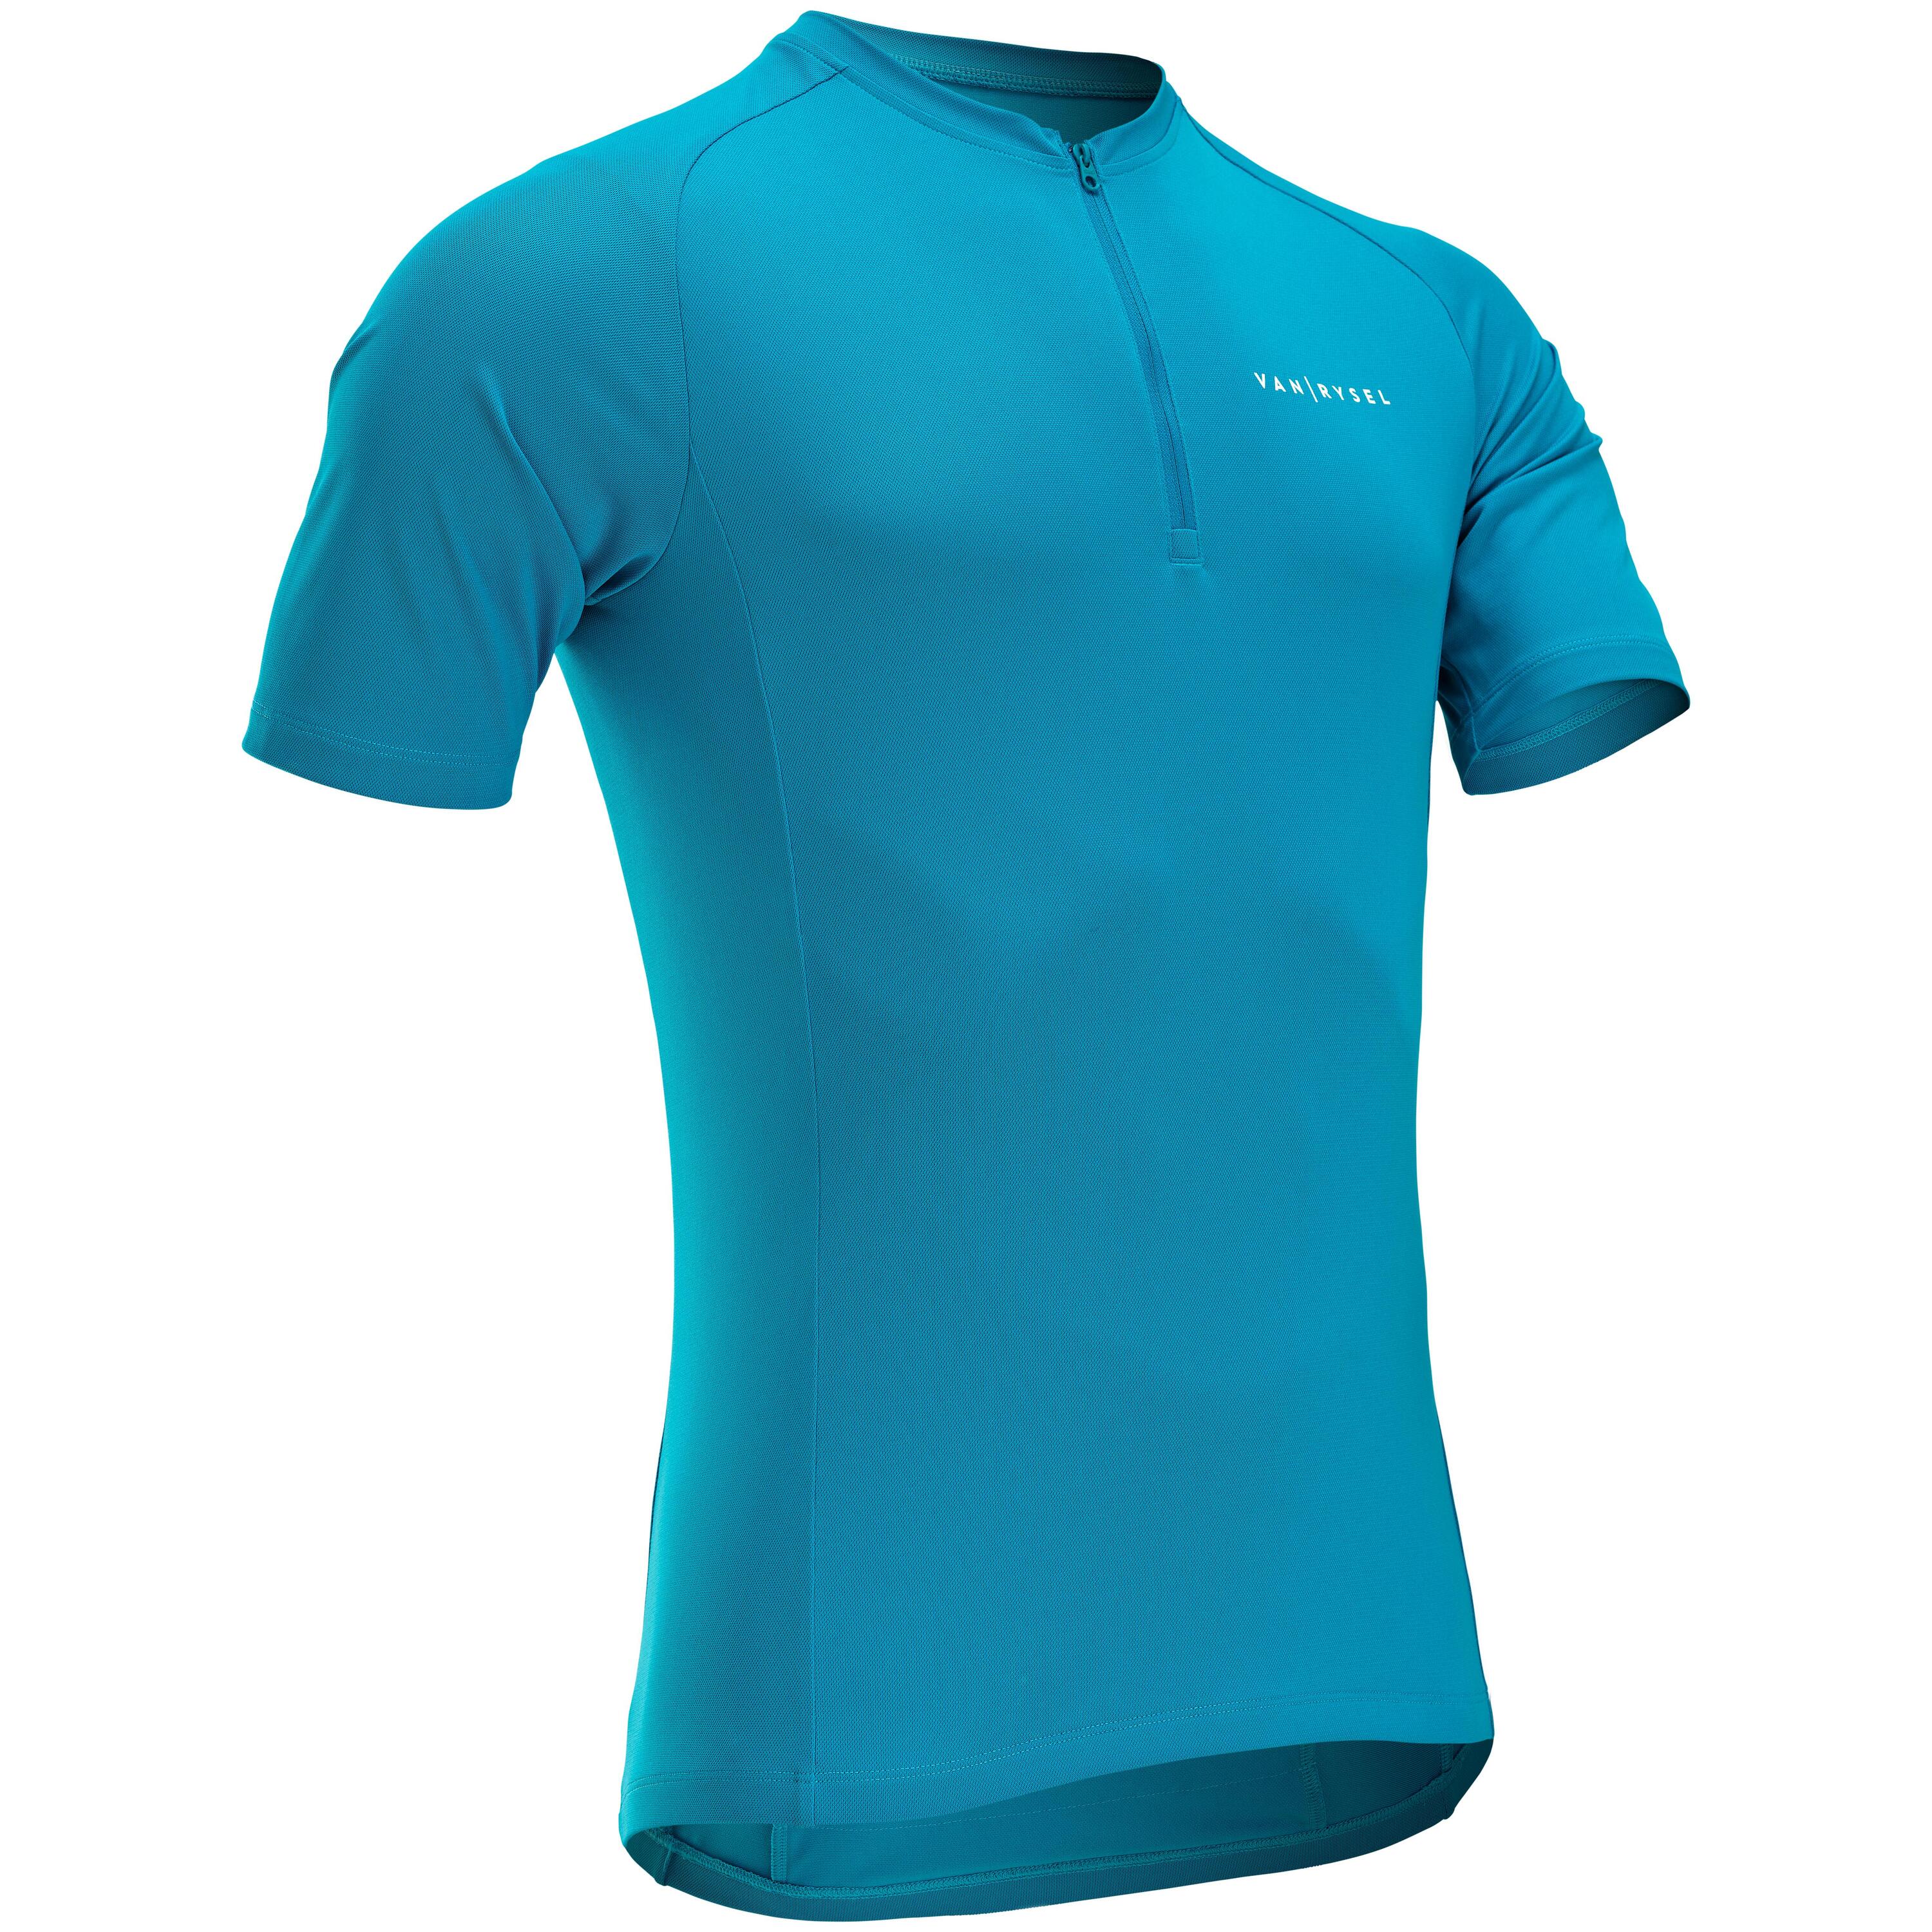 Men's Short-Sleeved Road Cycling Summer Jersey Essential - Blue 2/7